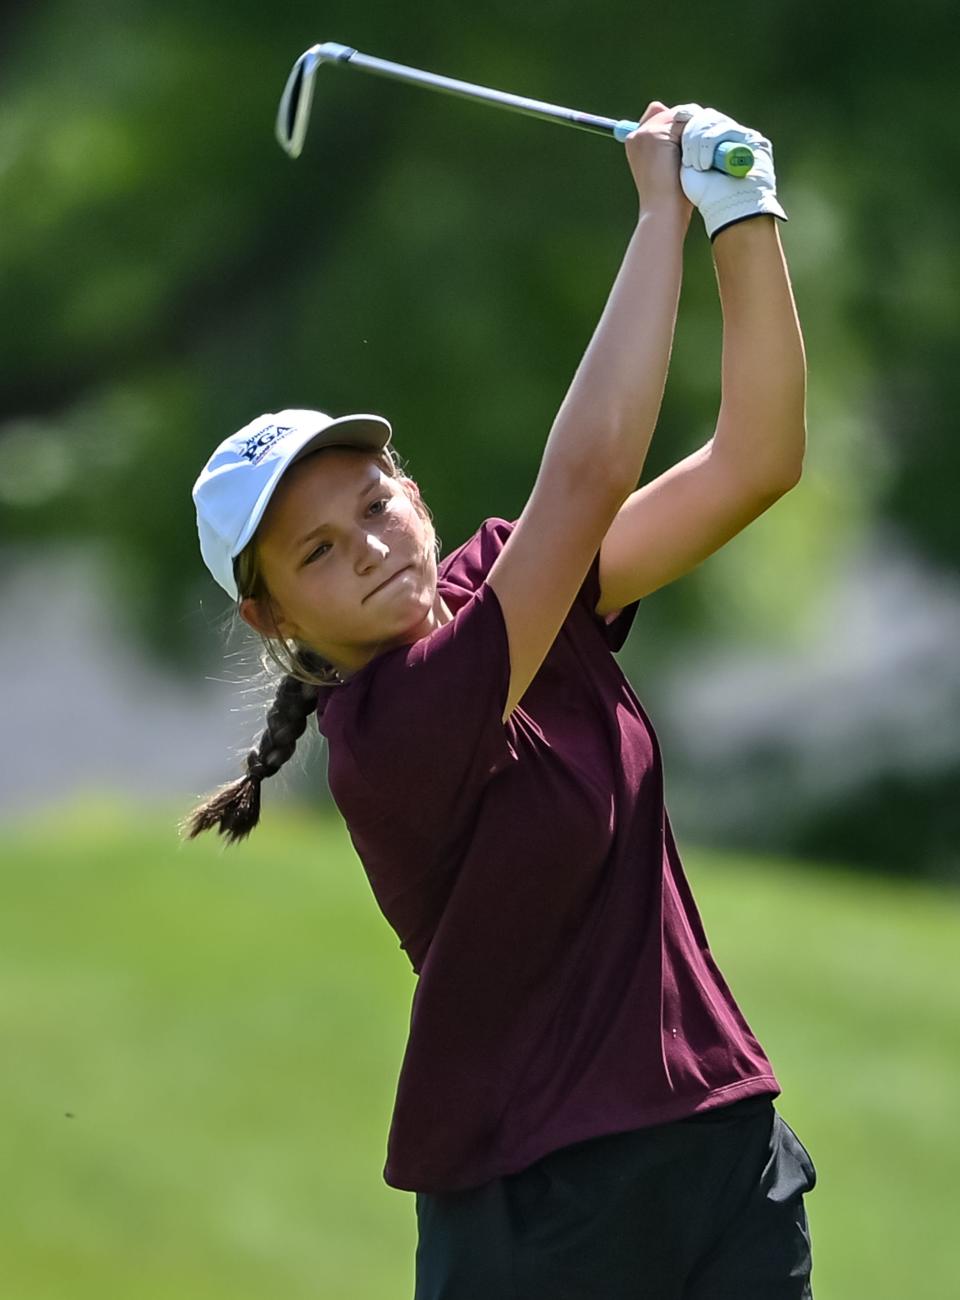 Wes-Del freshman Jane Armington won match medalist with score of 76 in the Delaware County girls golf tournament at the Muncie Elks Golf Club on Saturday, August 12, 2023.